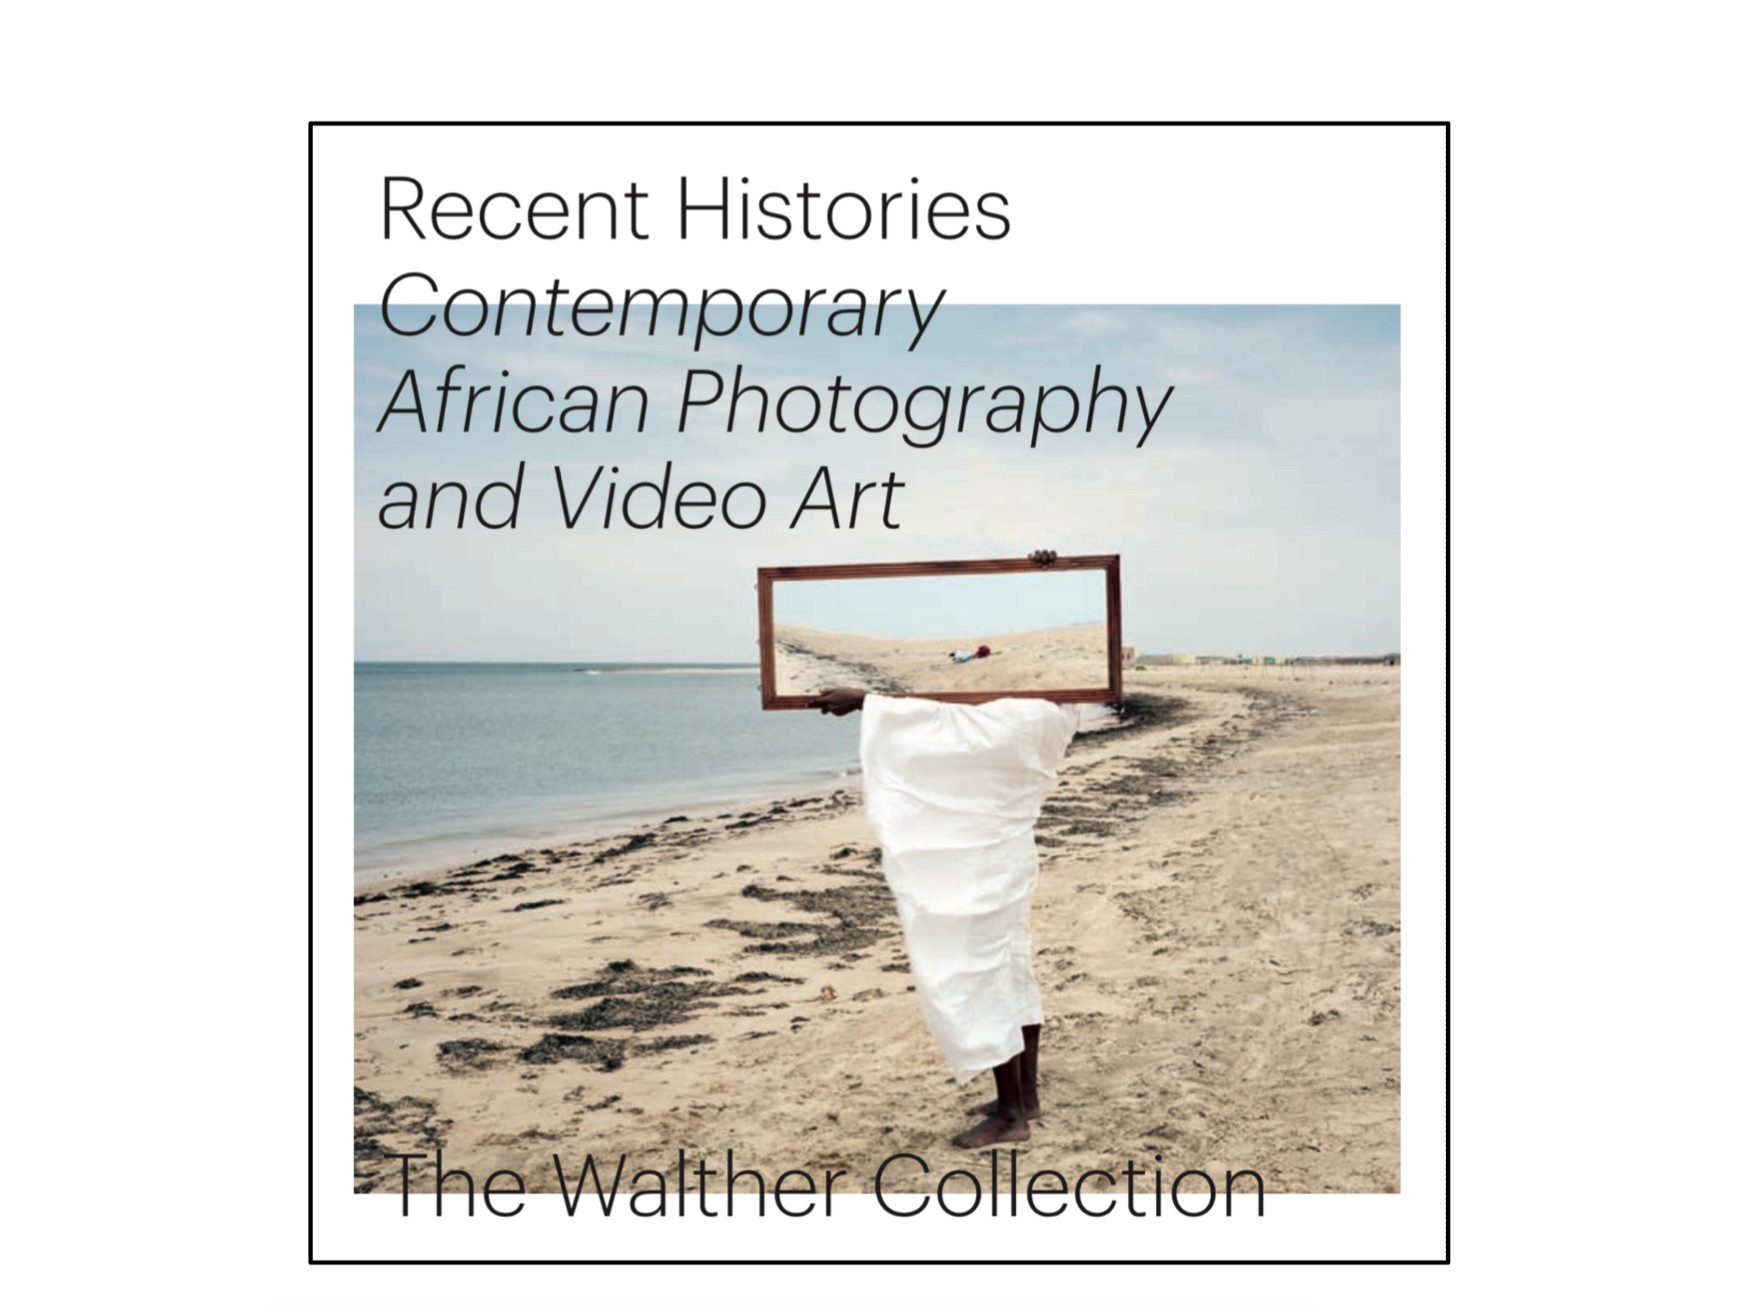 Recent Histories Contemporary African Photography and Video Art. Walther Foundation. Available on Artskop.com.